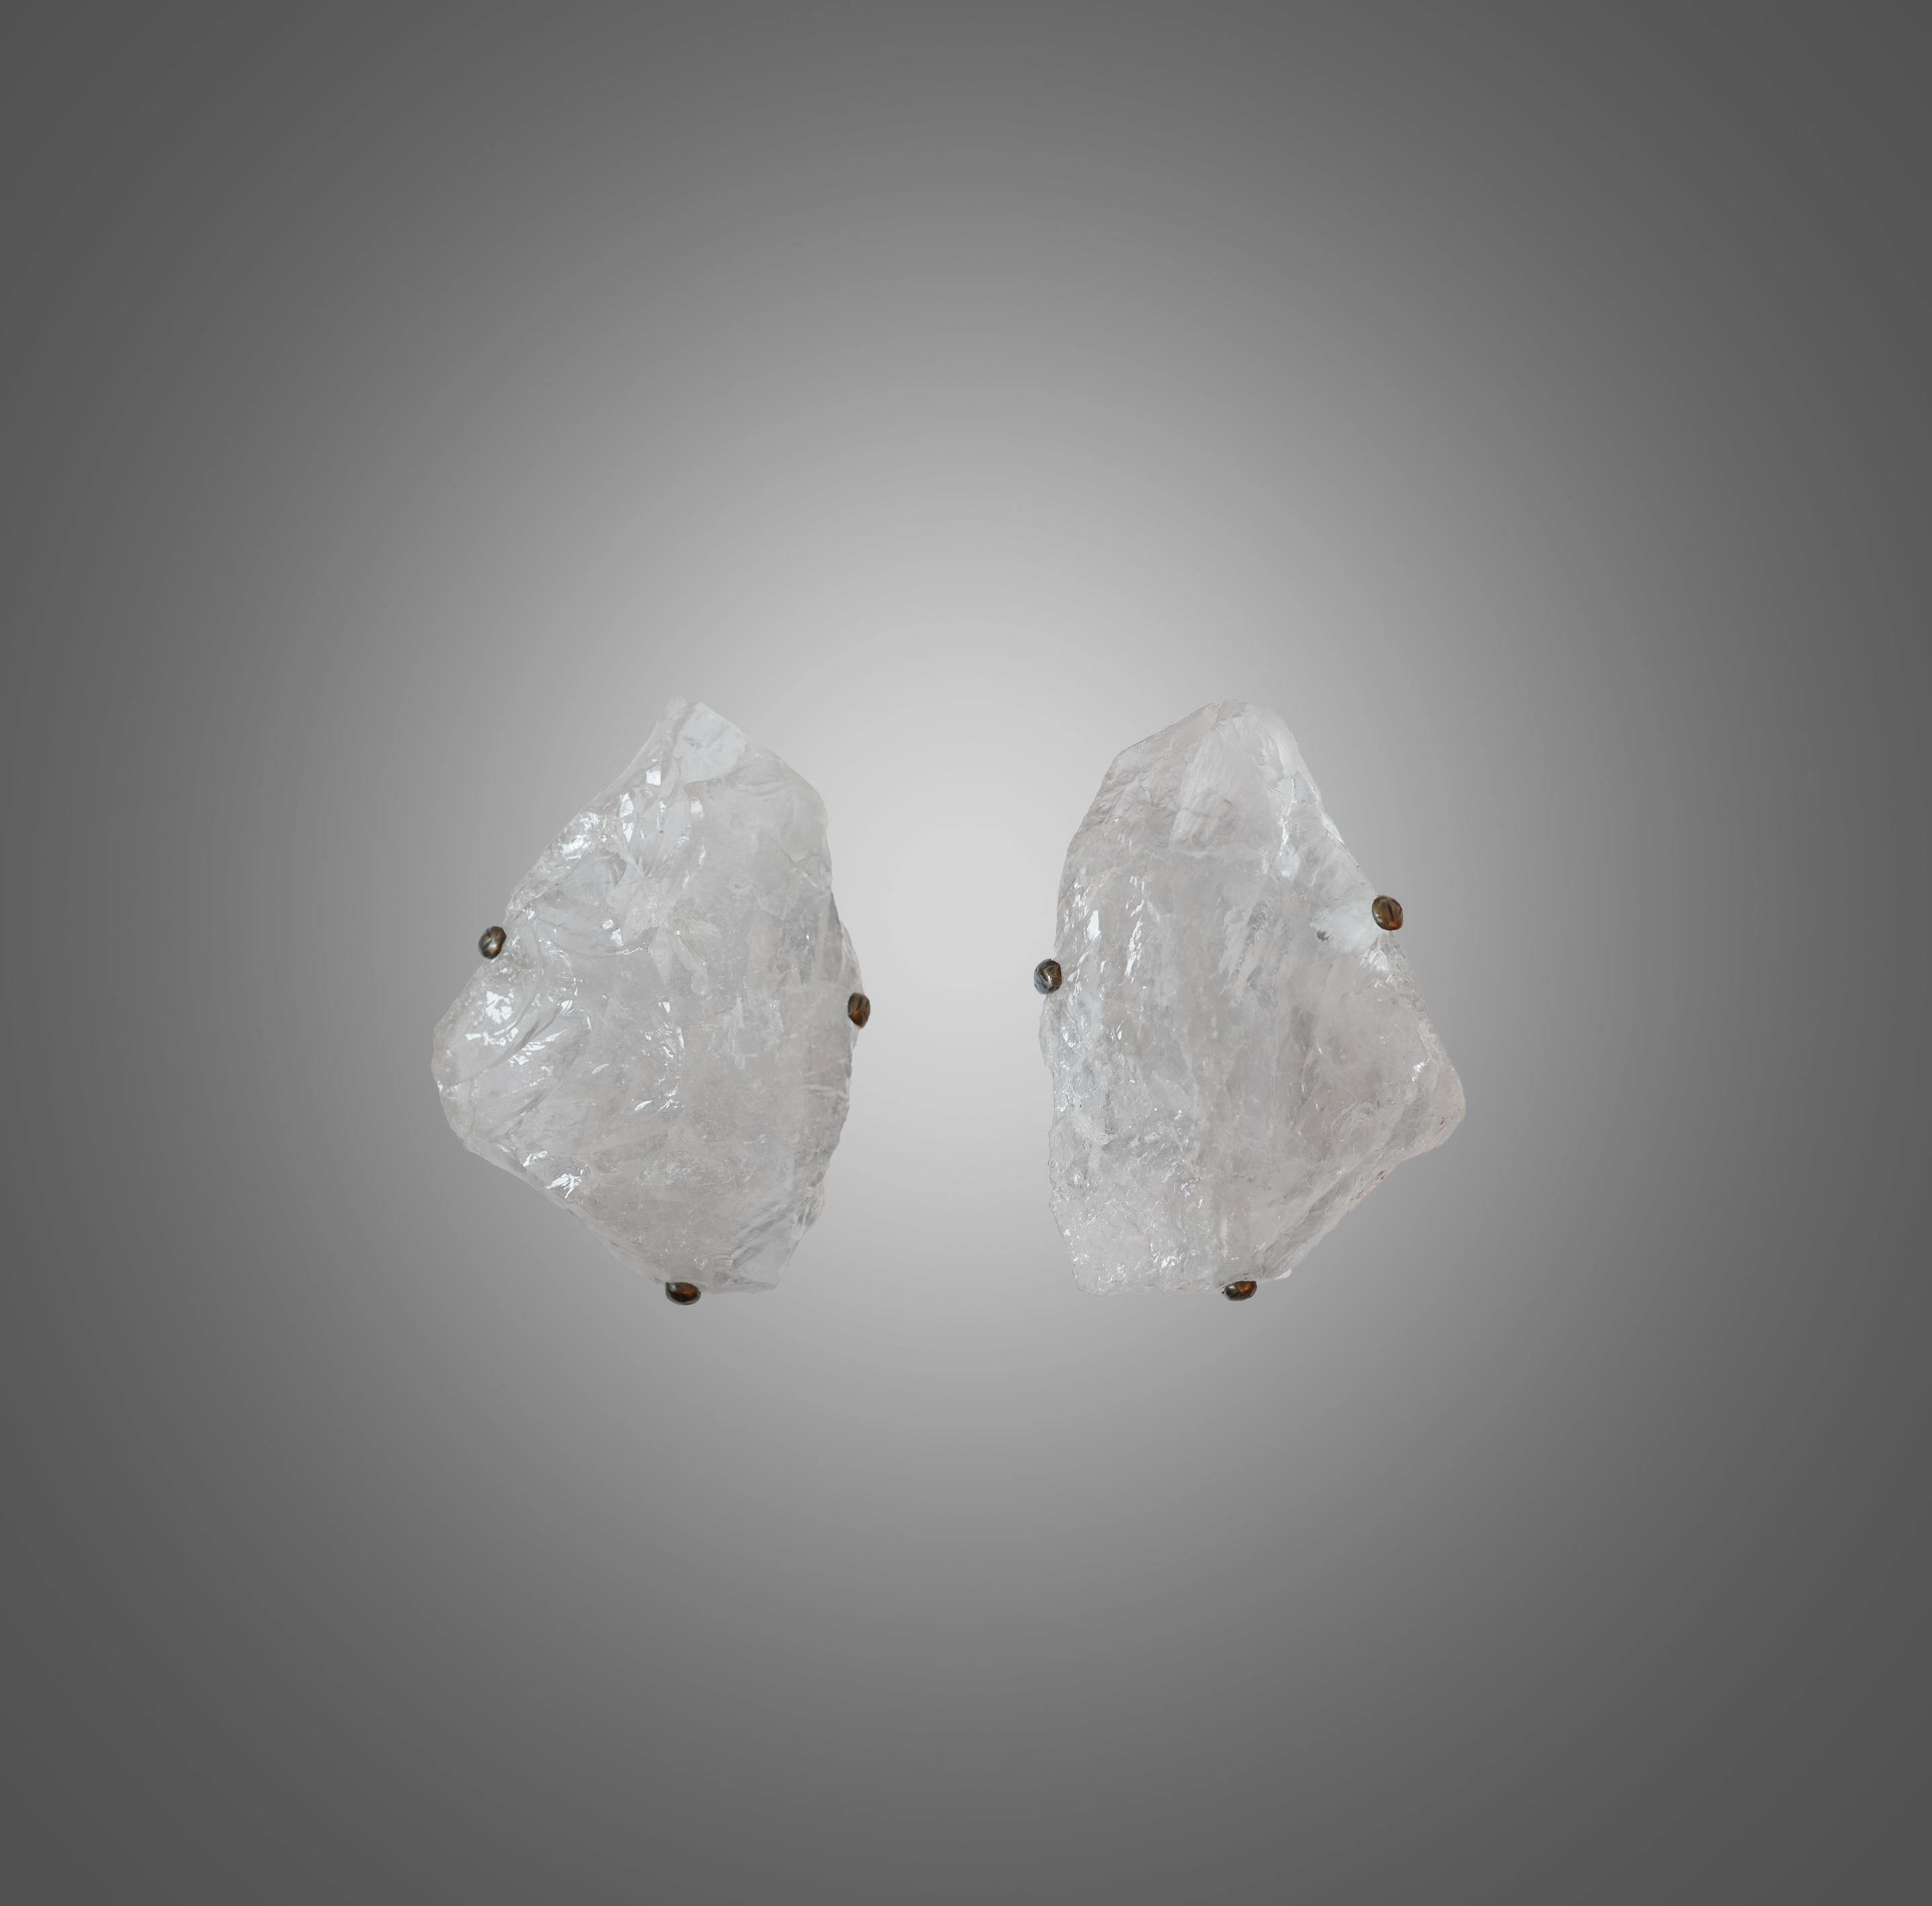 Pair of natural rock crystal quartz wall sconces with antique brass-mounted, selected from natural rock crystal with the beautiful natural surface. Created by Phoenix gallery.
Each wall sconce is installed with two sockets. 60 watts max each